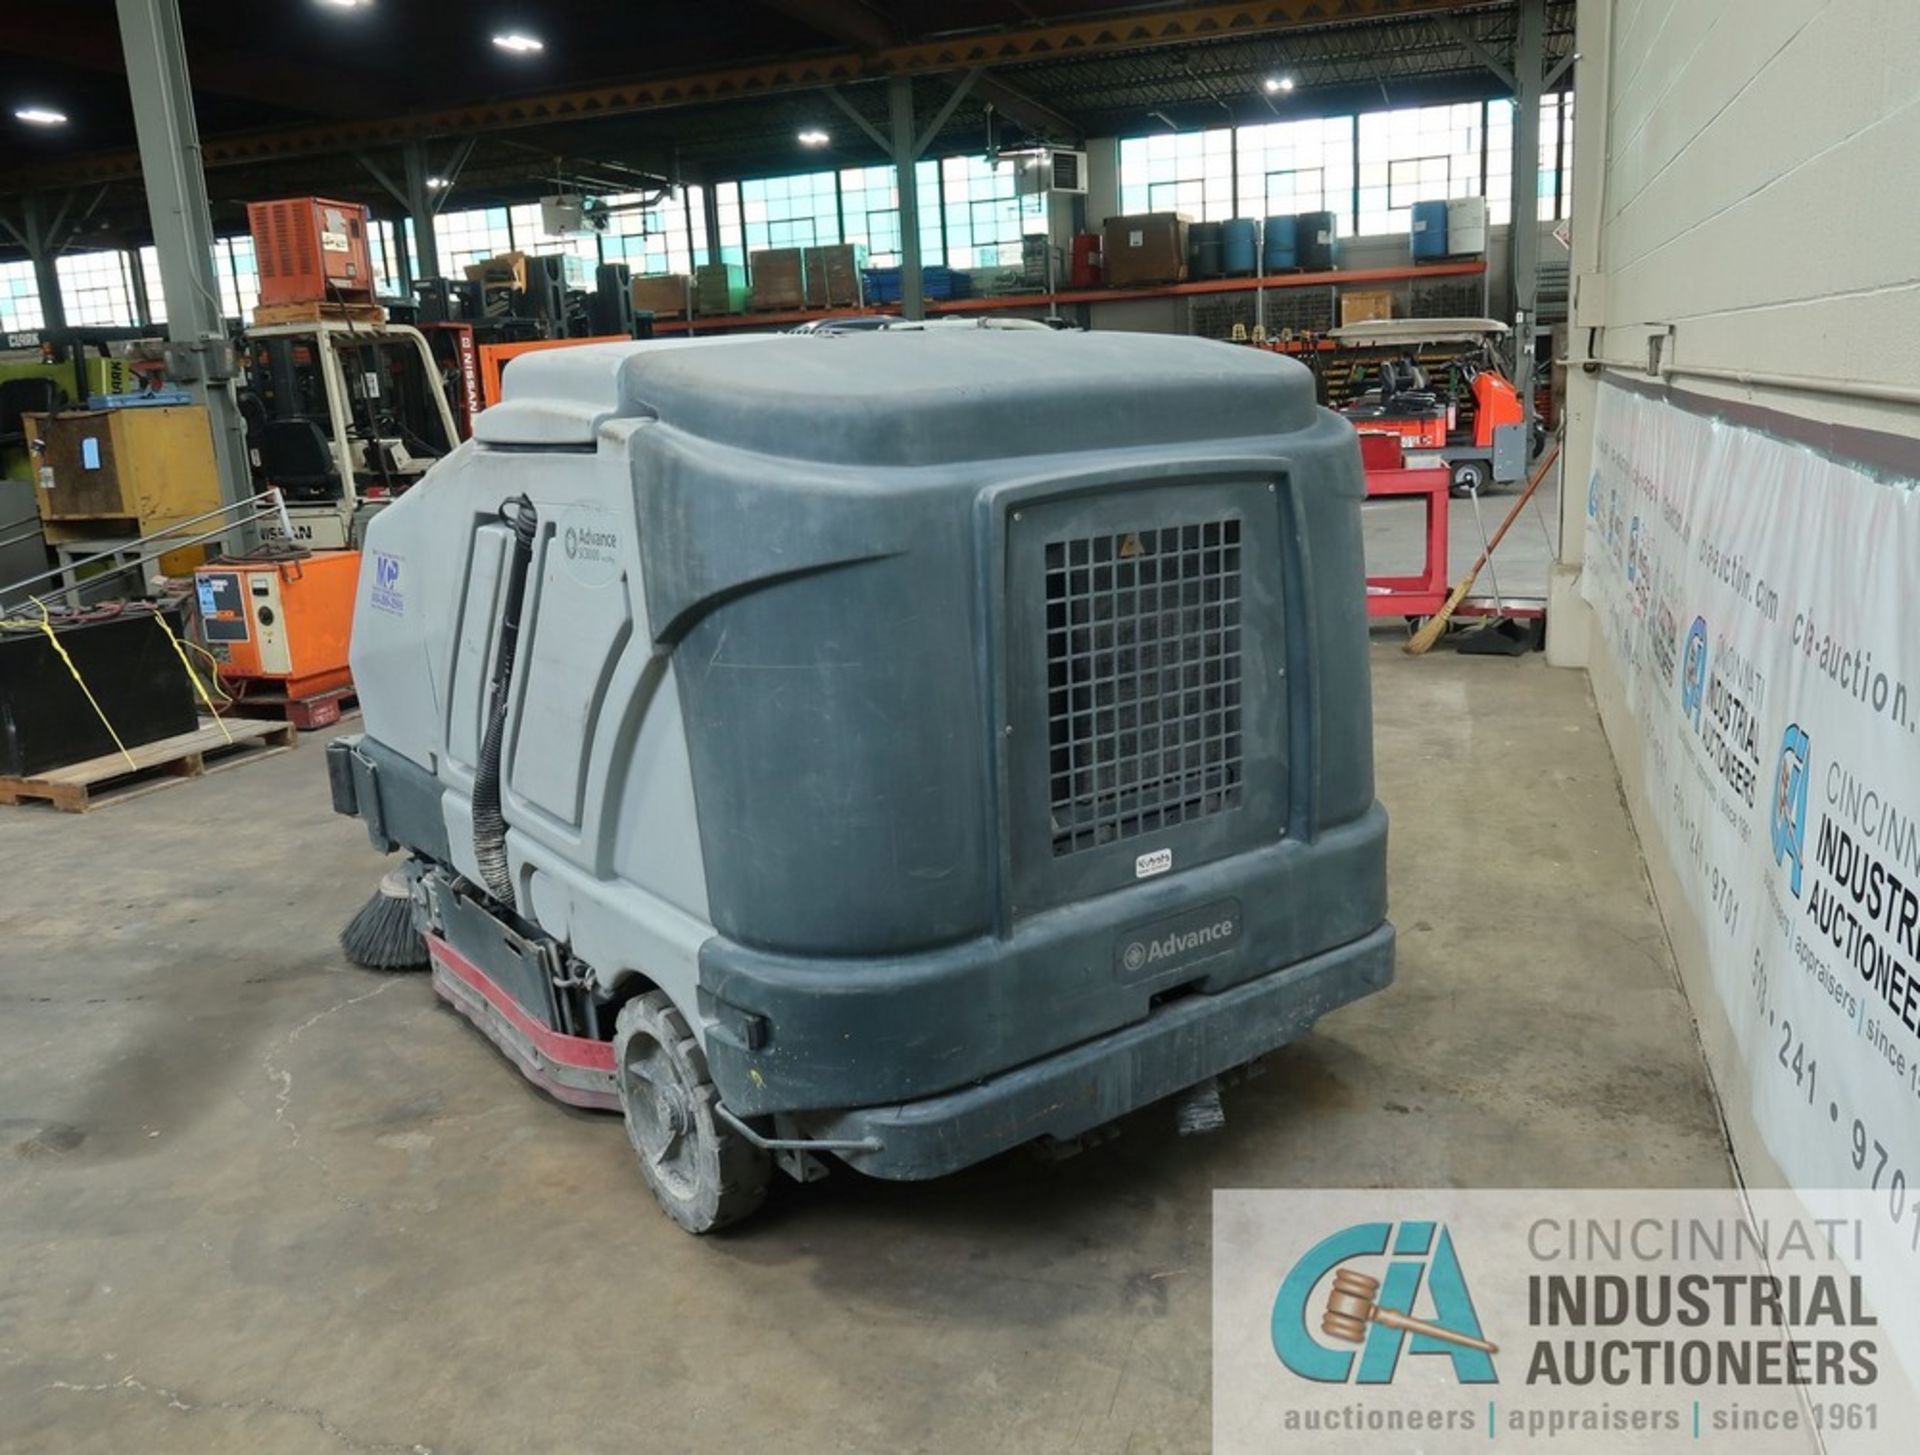 2019 ADVANCE MODEL SC8000 LP GAS FLOOR SCRUBBER; S/N 1000069070, 1,198 HOURS SHOWING - Image 5 of 11